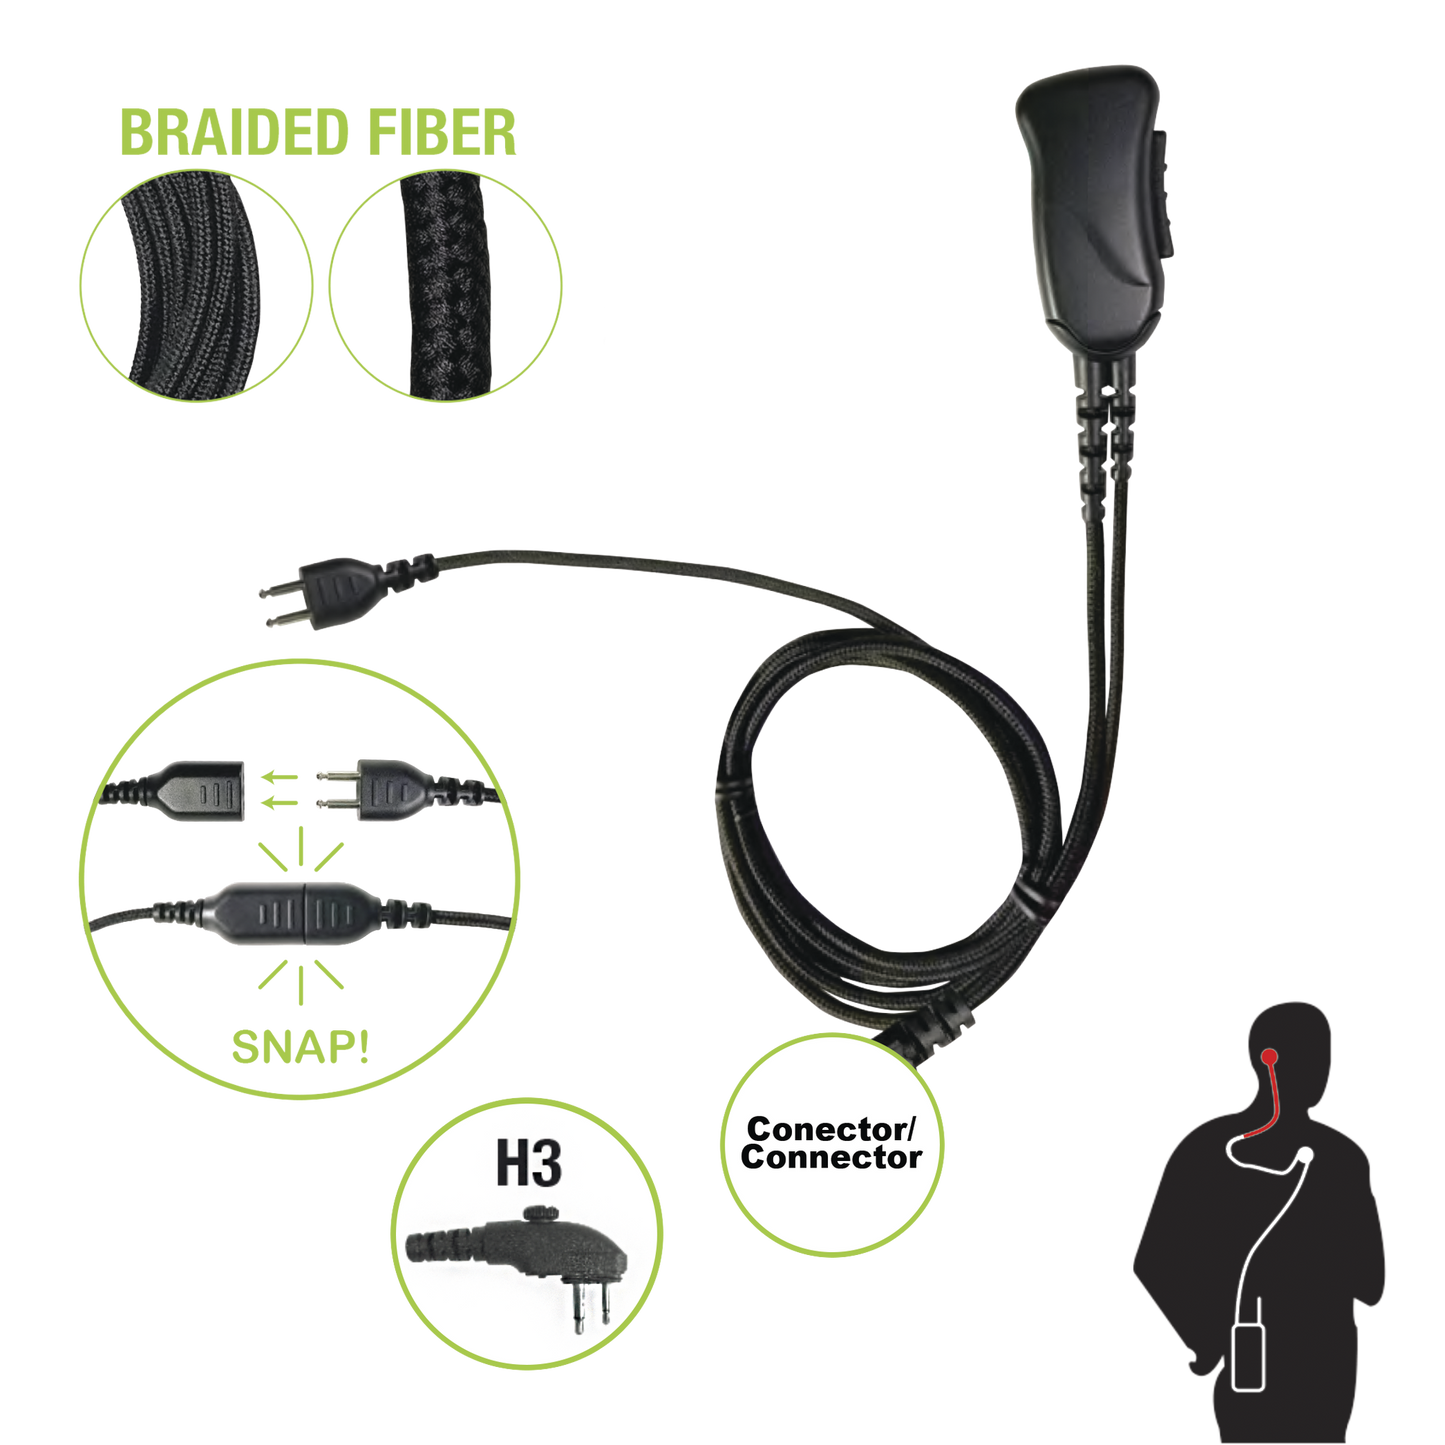 Braided Fiber 1 Cable Lapel Mic W/ Snap Connect for Hytera Connector. Select Different Earphones Not Included